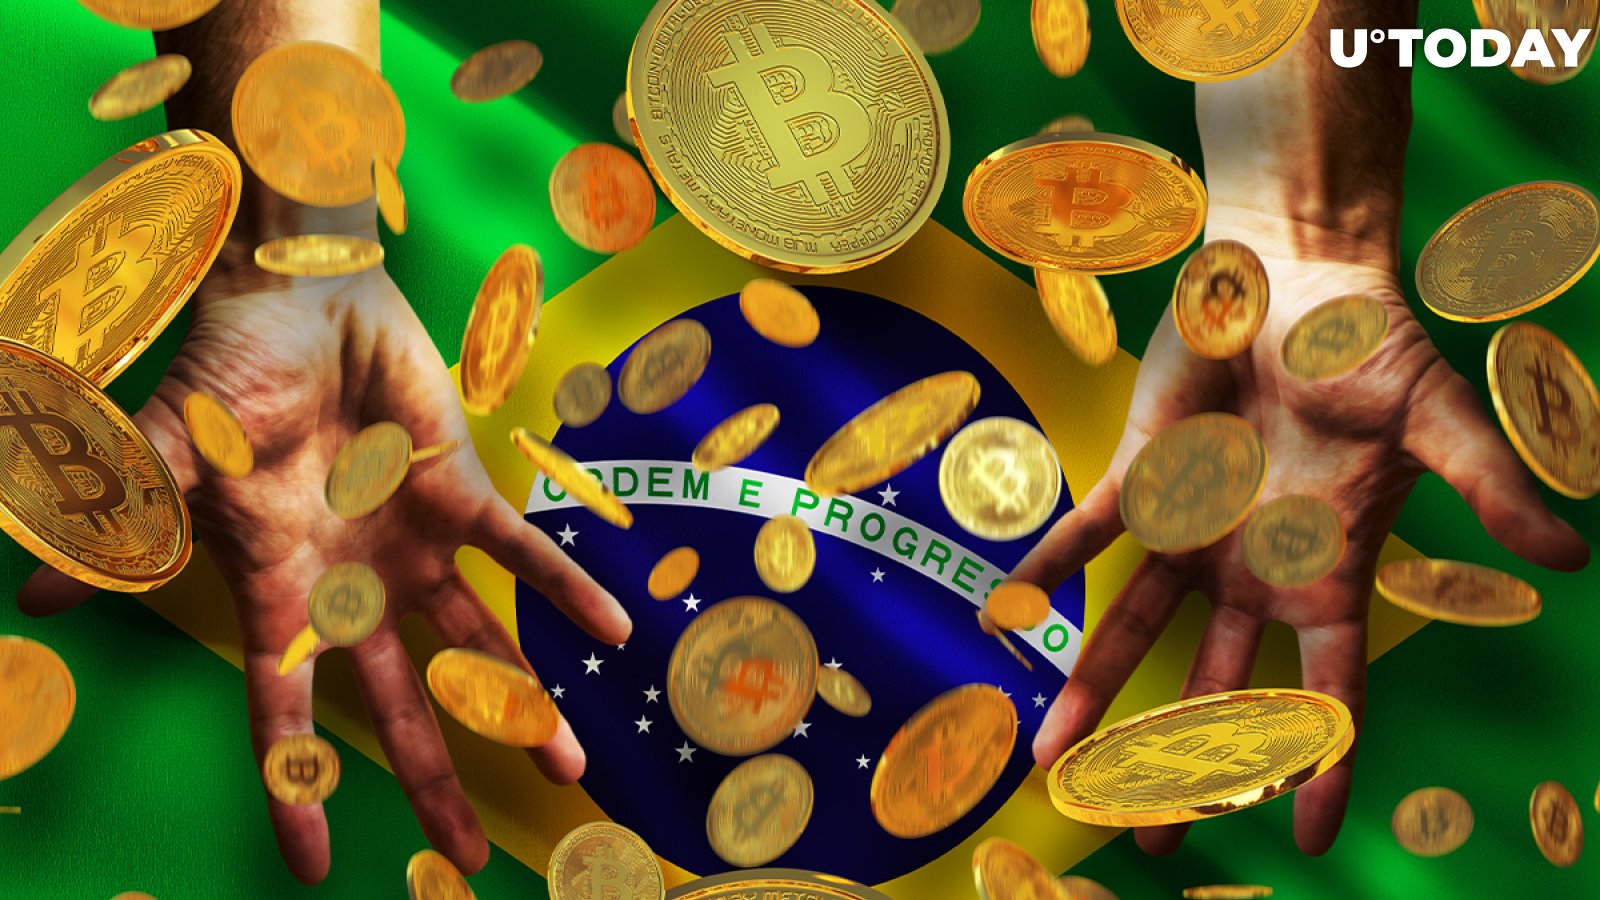 Almost Half of Brazilians Want to Make Bitcoin Official Currency: Poll